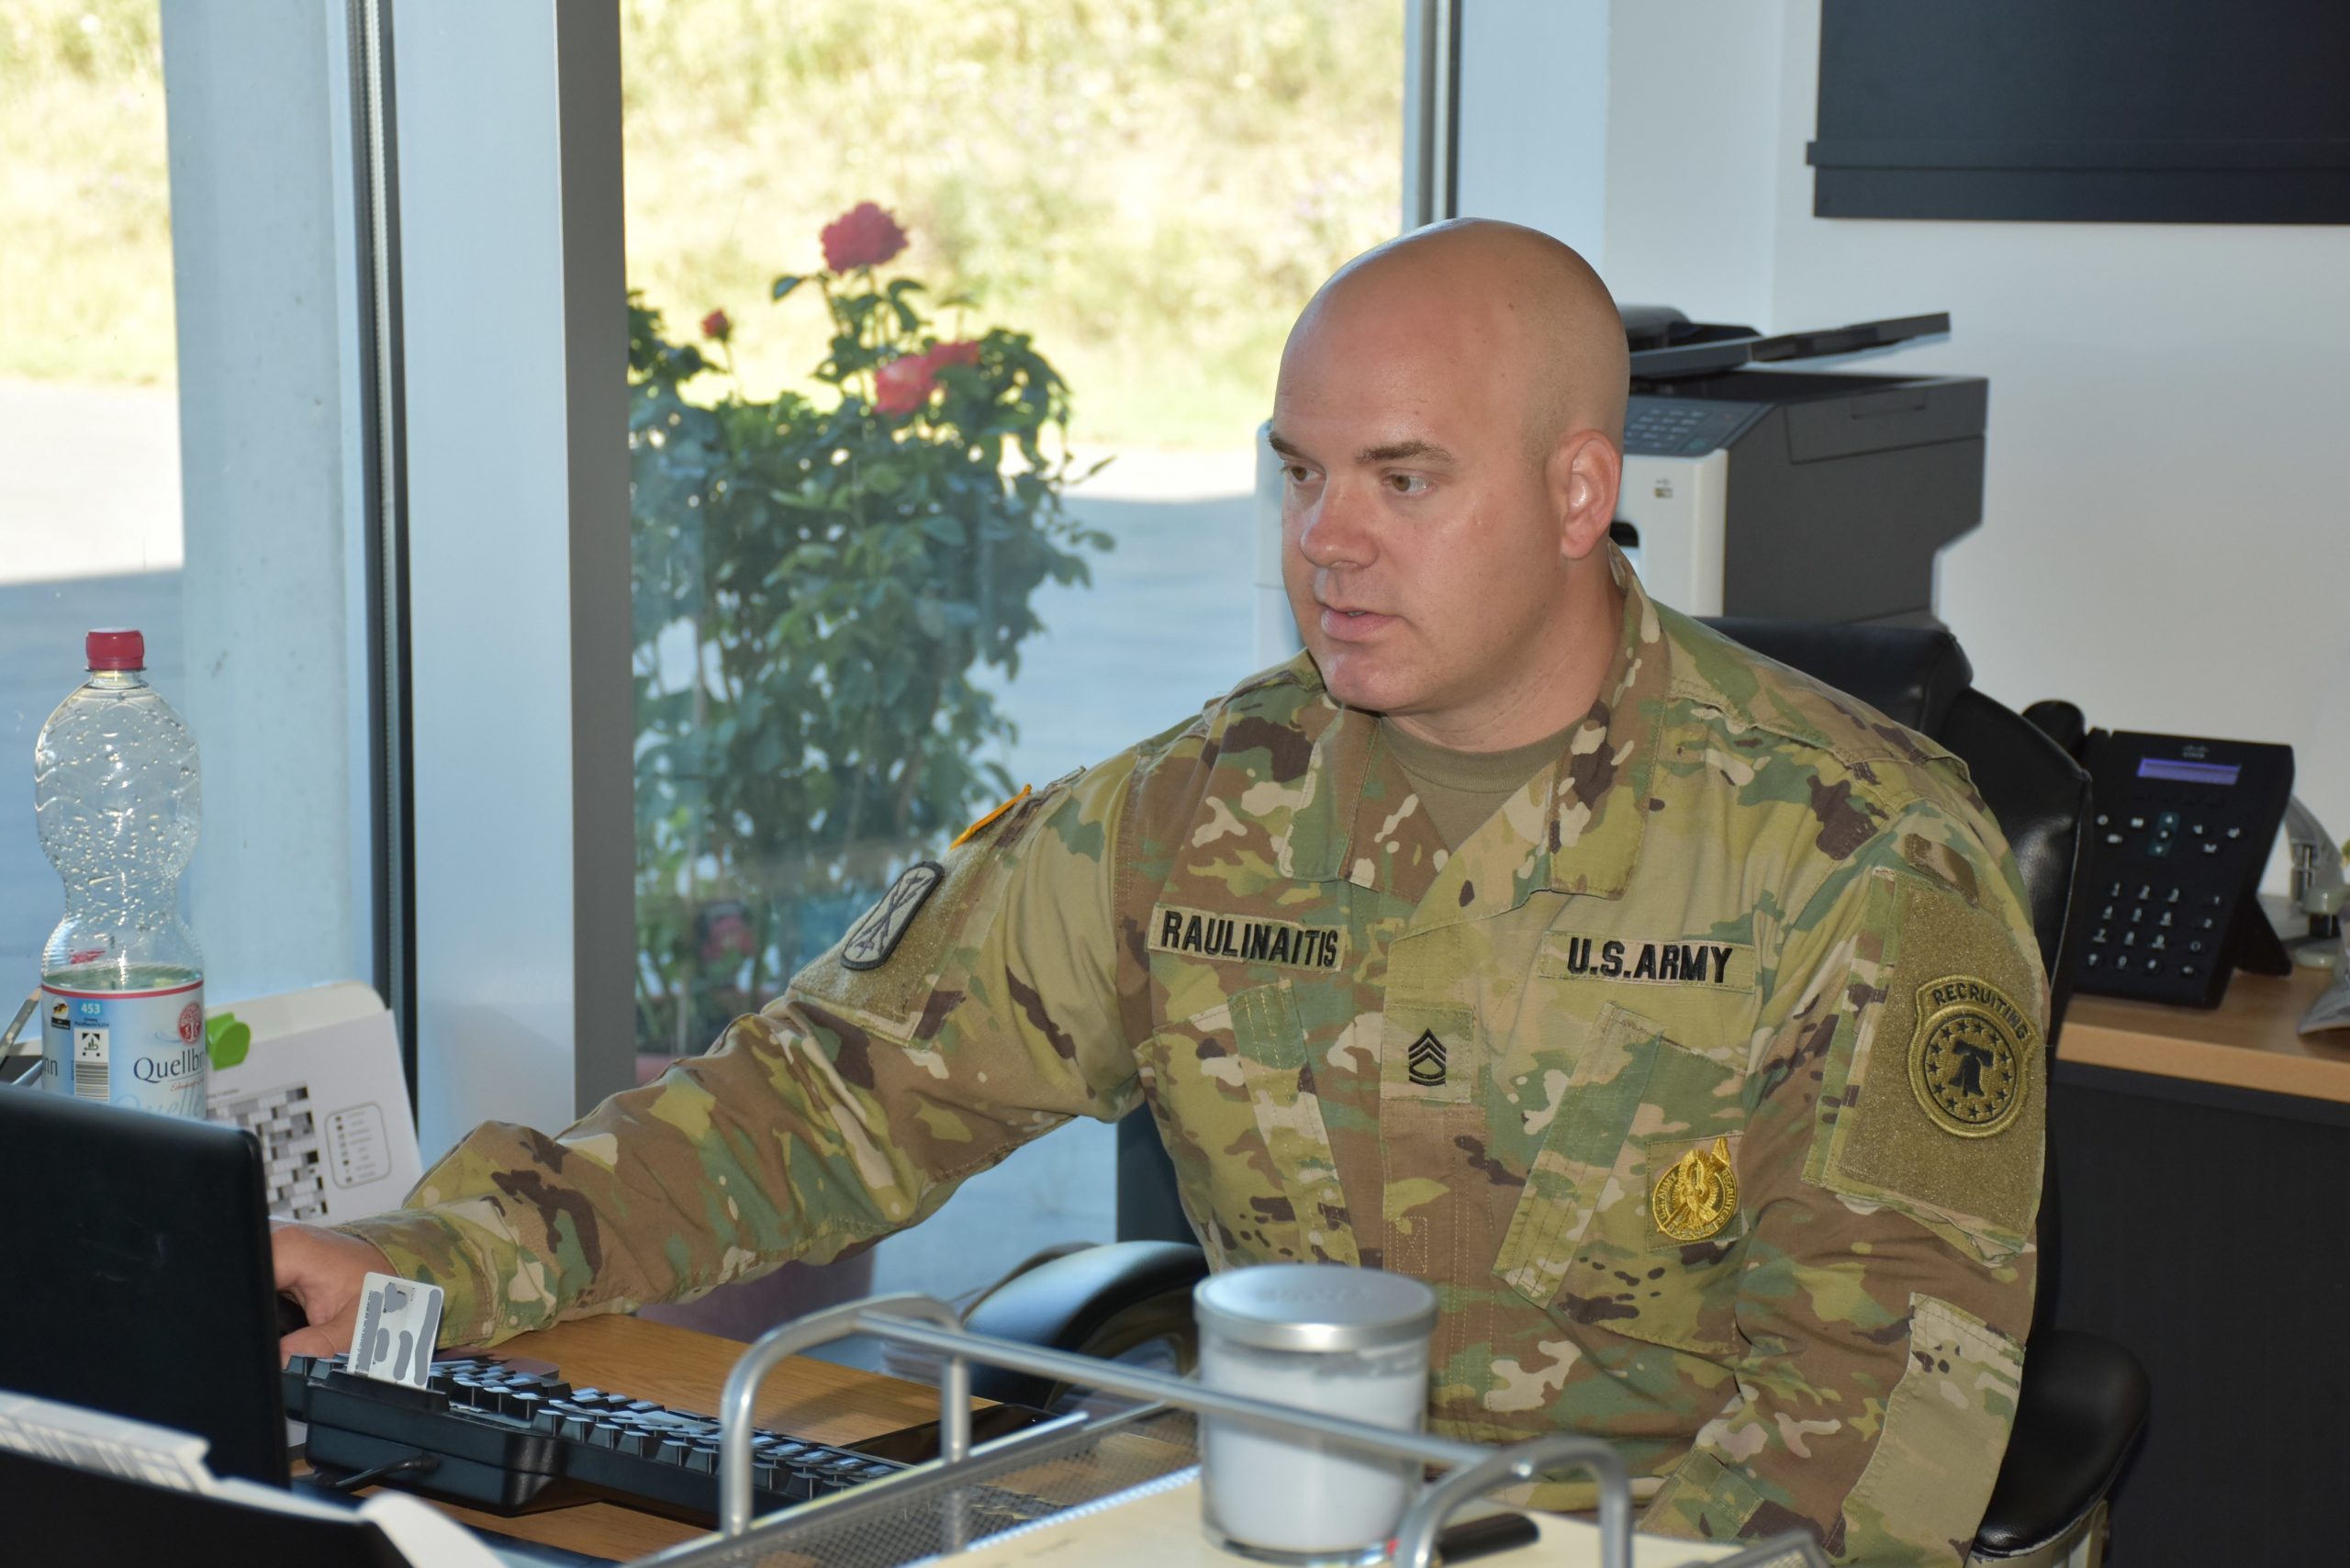 A man in an Army uniform sits, working at a computer.